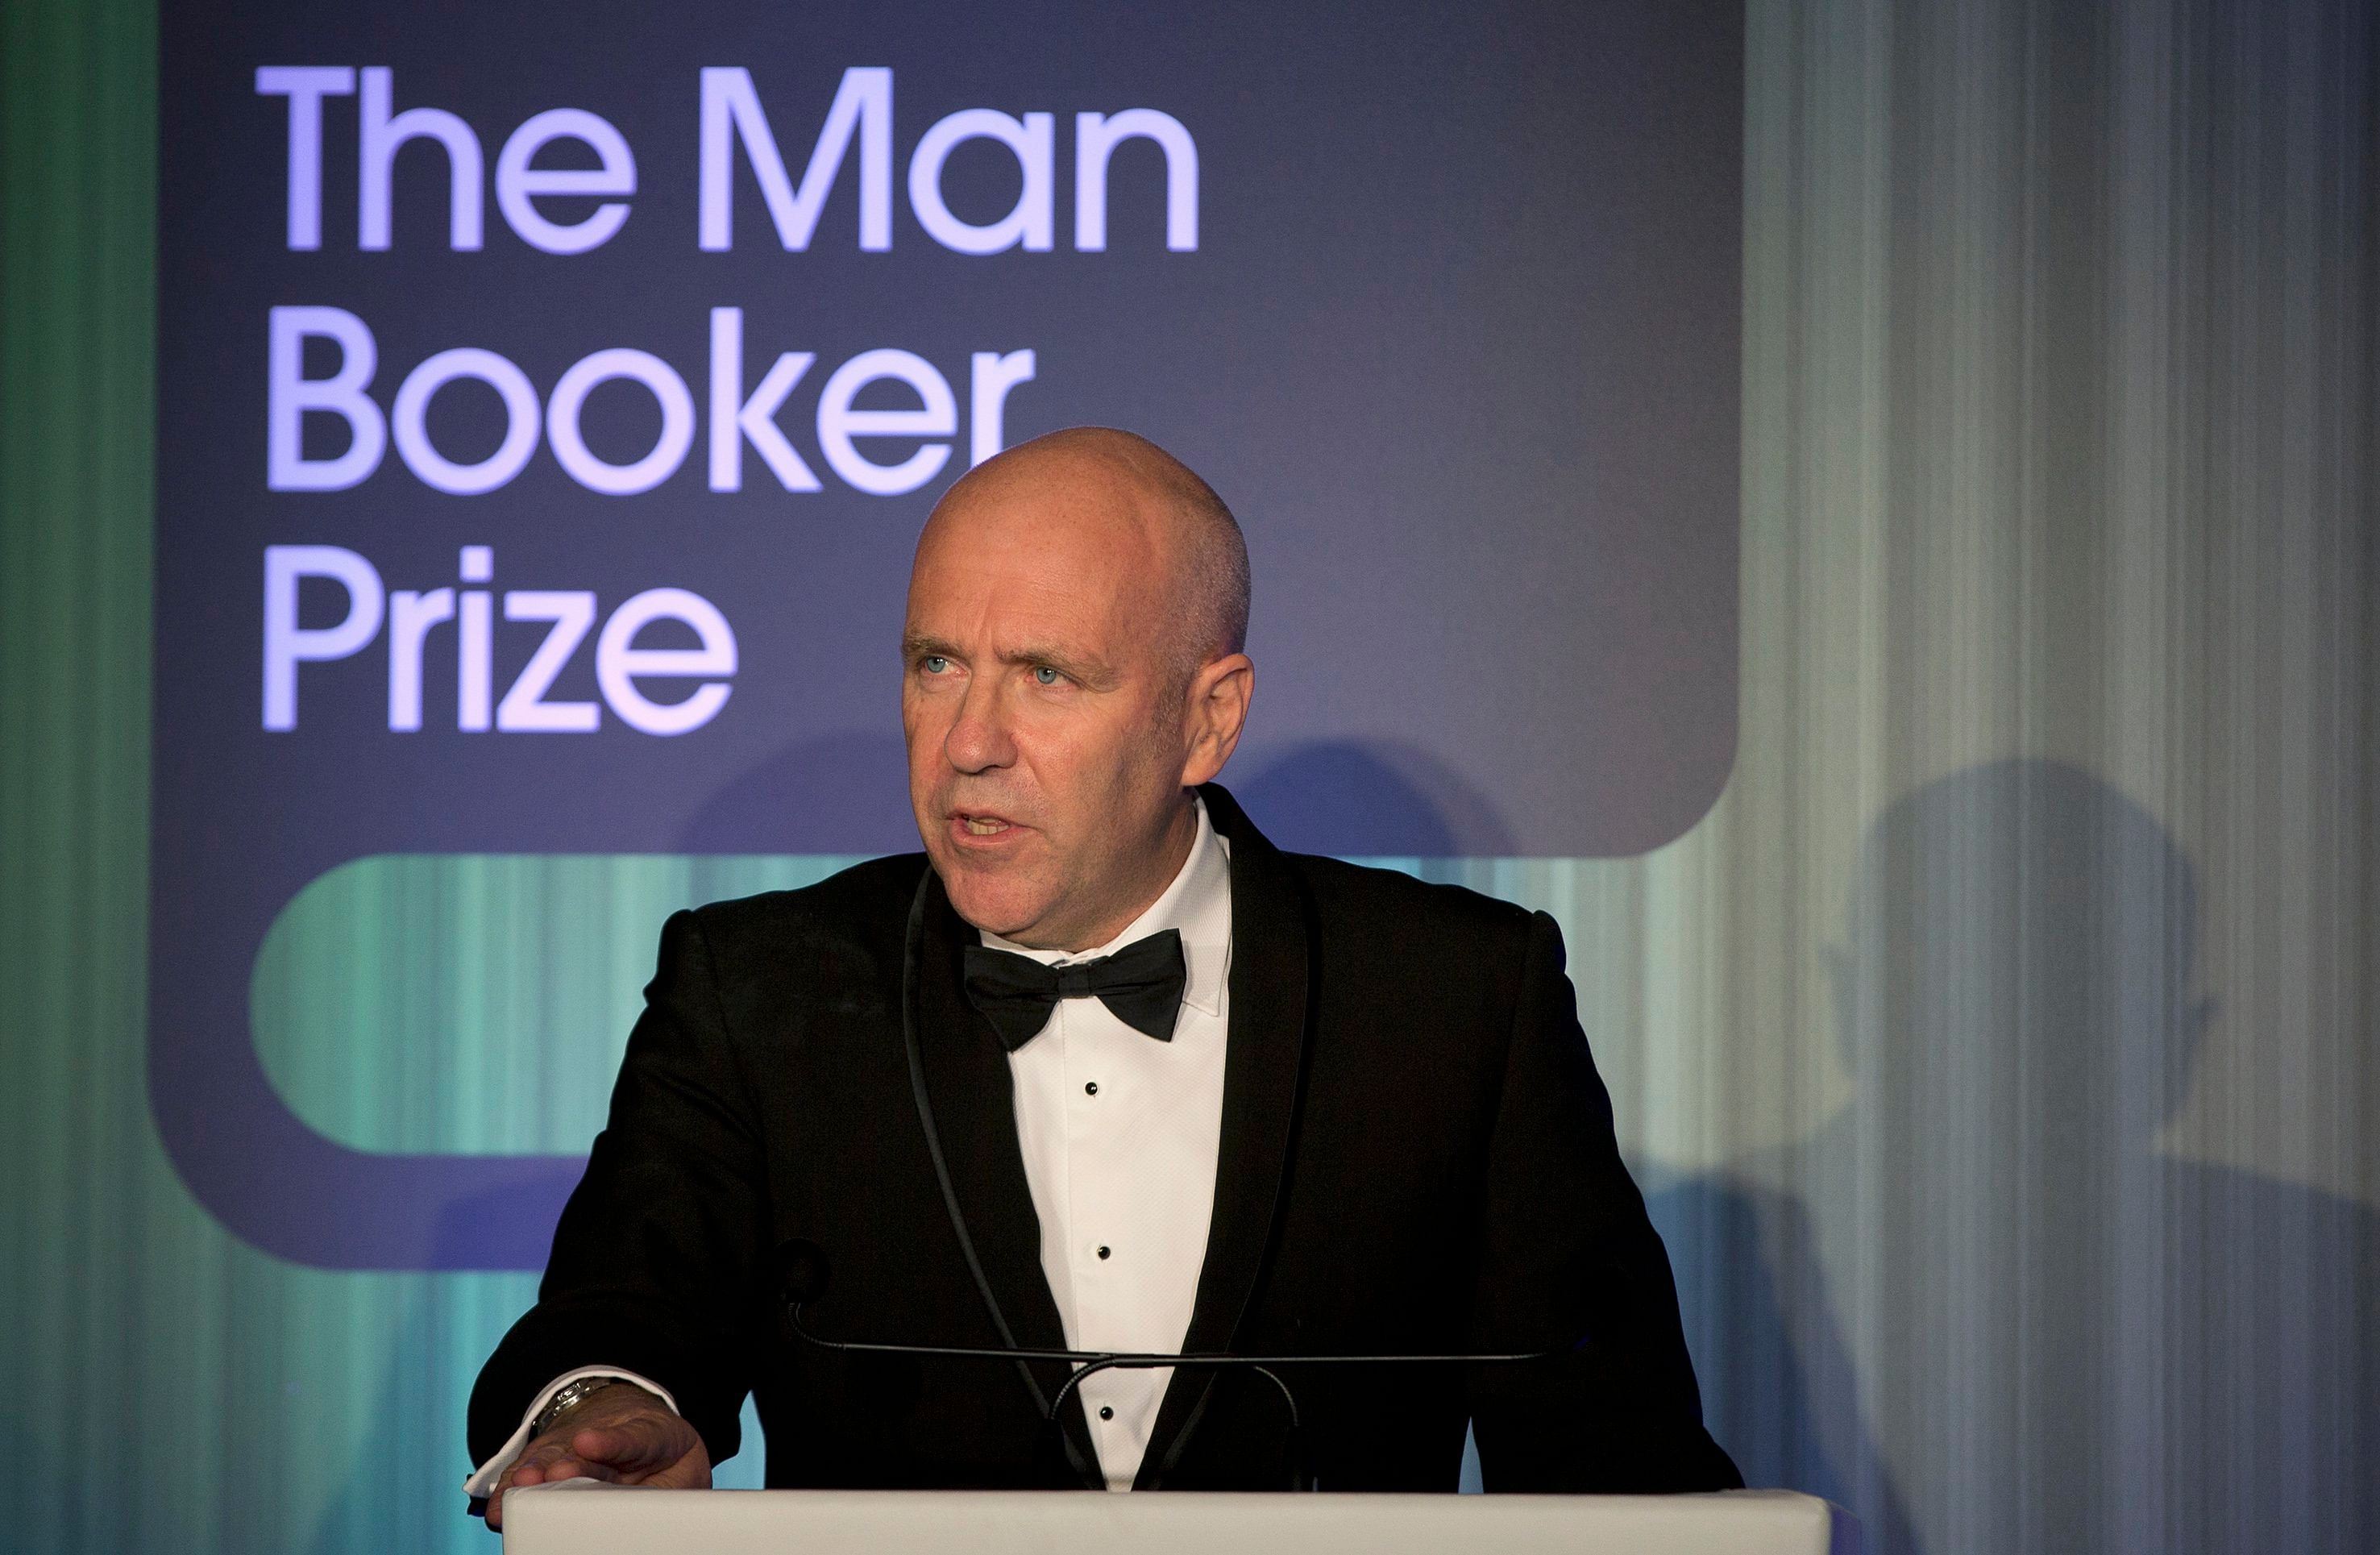 Australian author Richard Flanagan, who wrote "The Narrow Road to the Deep North", speaks after winning the 2014 Man Booker Prize for Fiction at the Guildhall in London, October 14, 2014. Photo: Reuters 